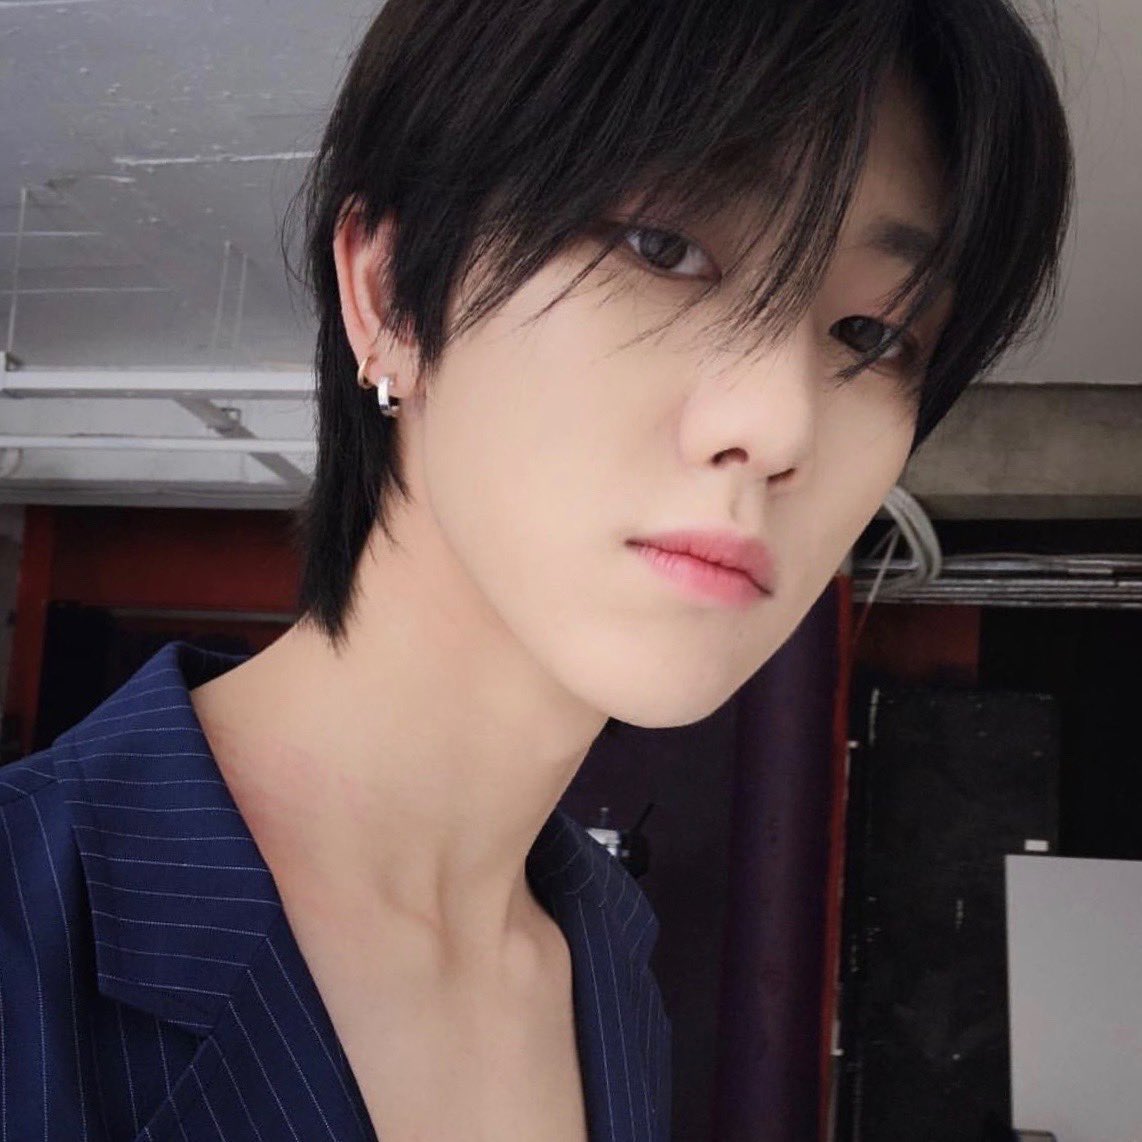 minghao as vanessa- THE baddest bitches in the game- everyone is in love but no one can have them - so hardworking- misunderstood but truly a sweetheart